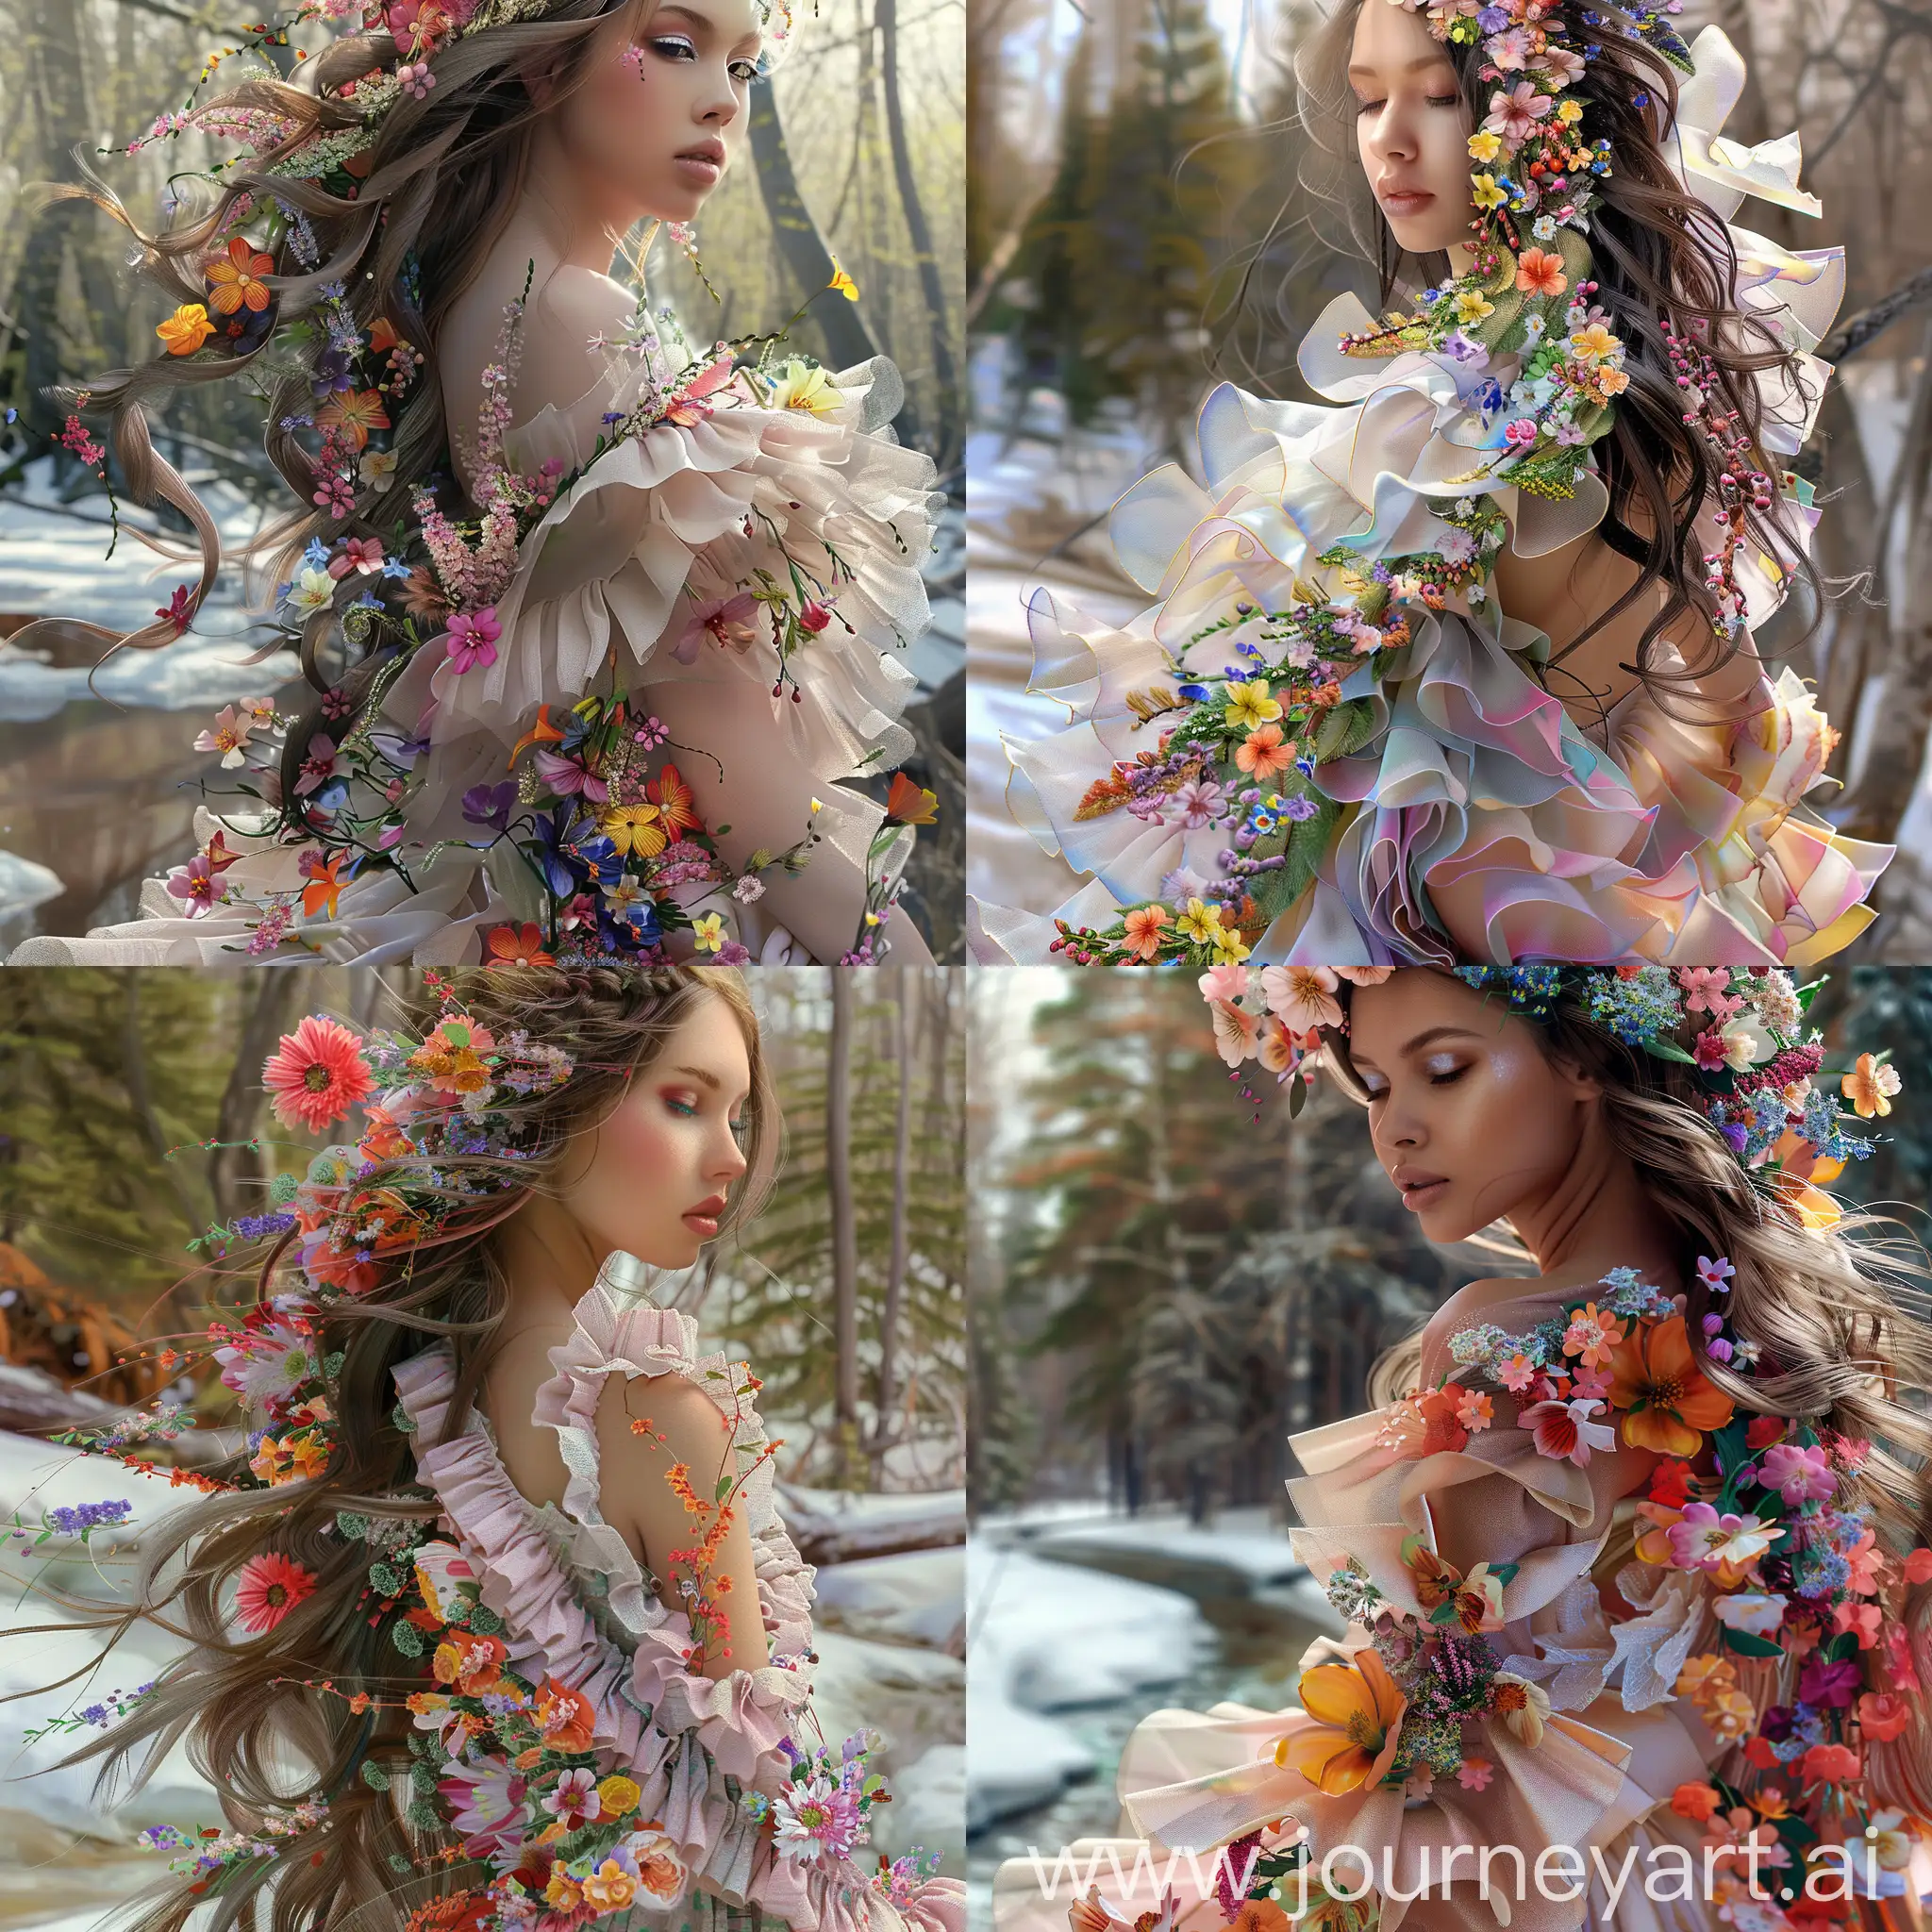 Spring-Beauty-Woman-with-Floral-Adornments-Against-Melting-Snow-Background